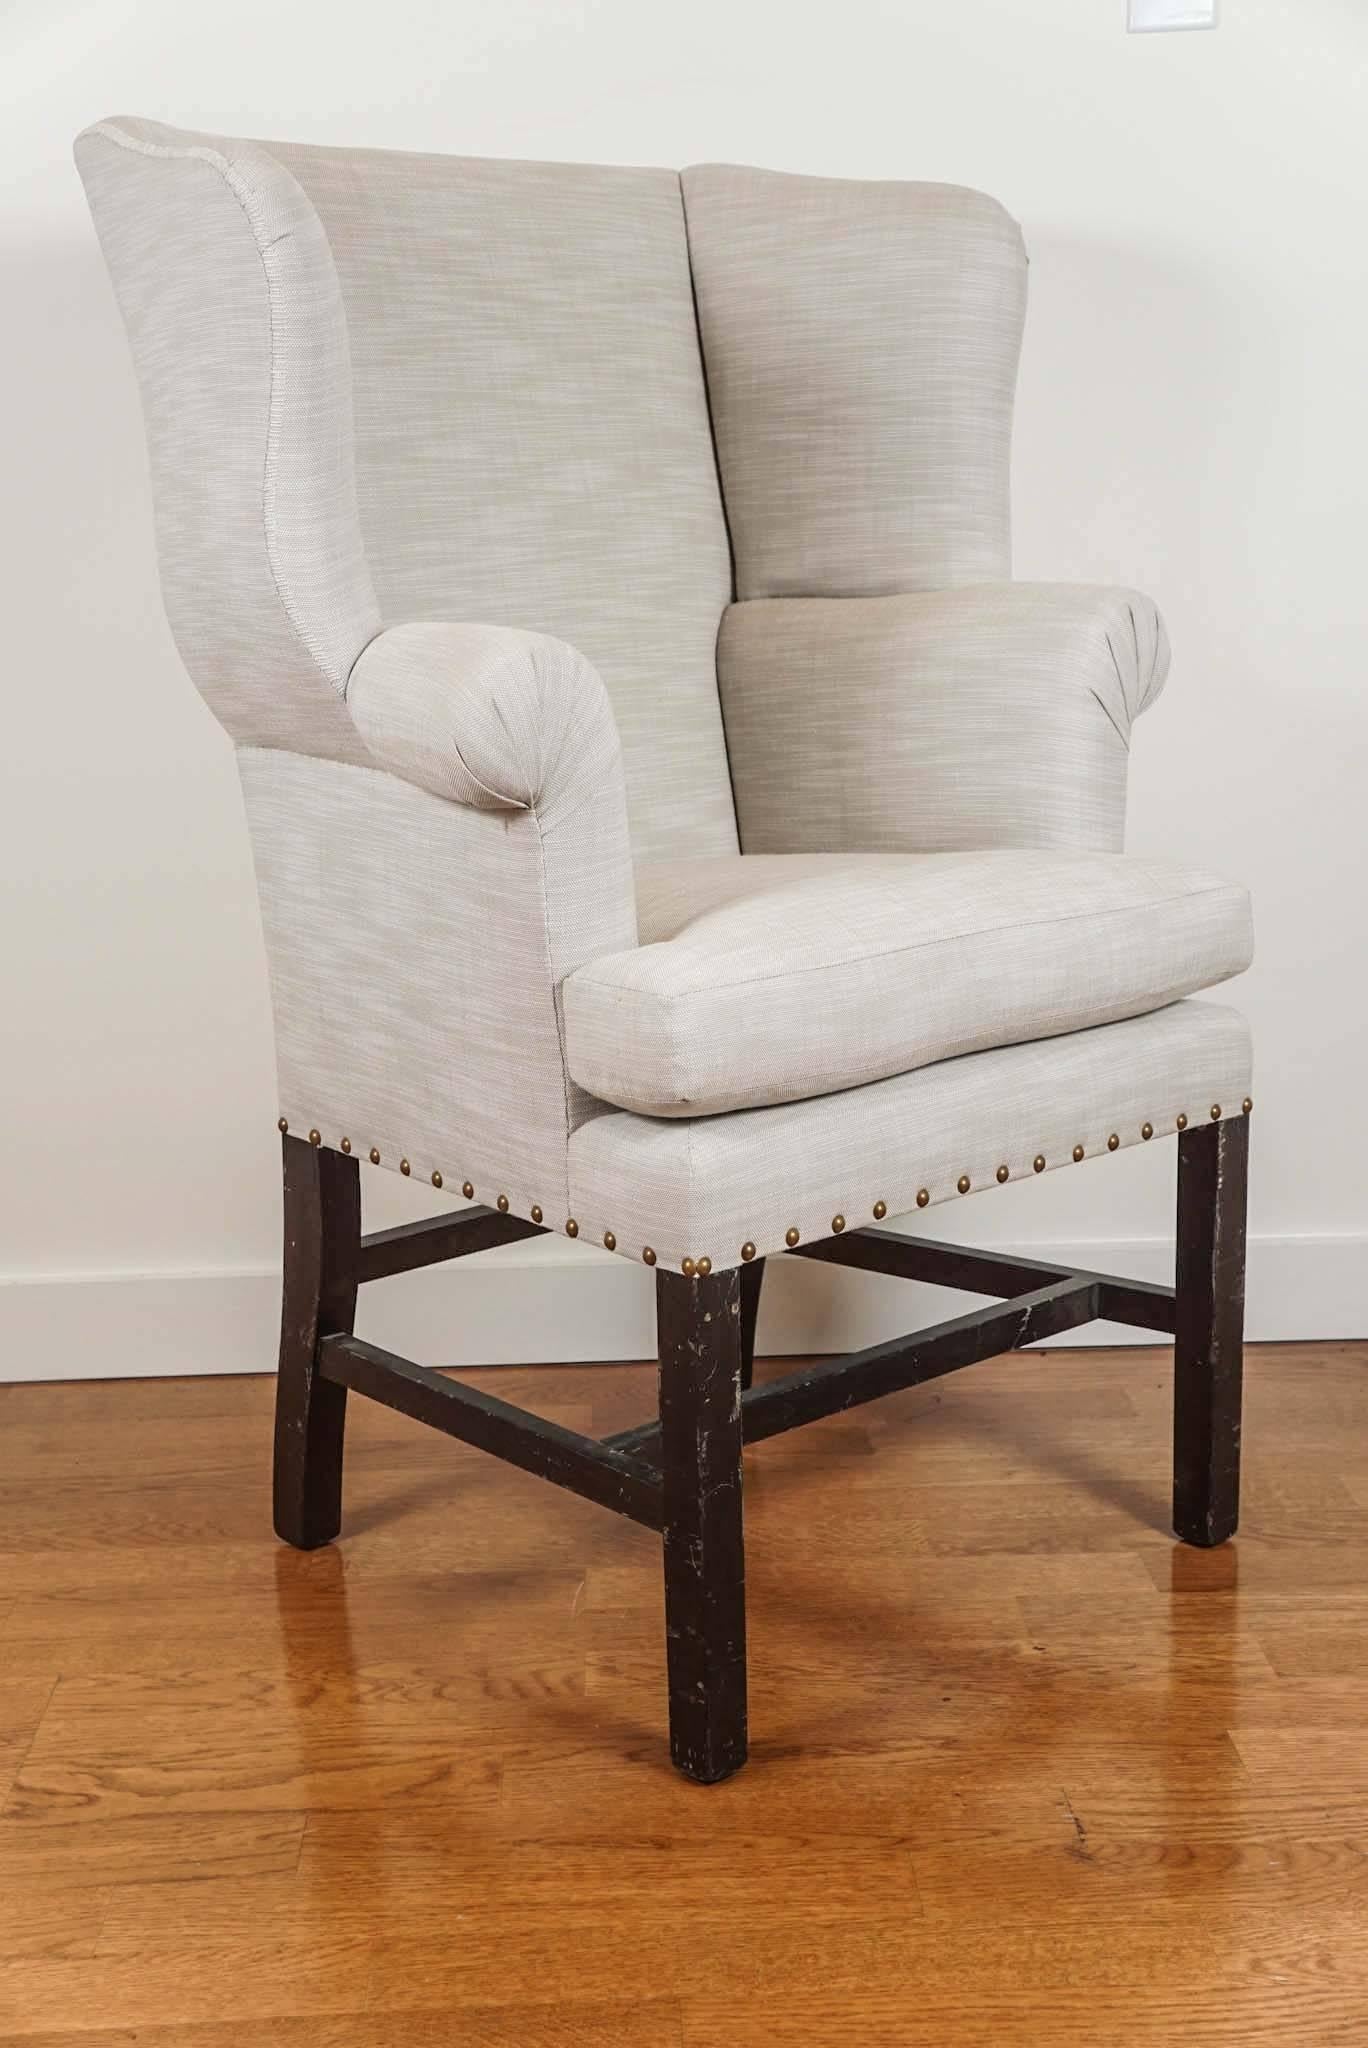 Charming petite wingback chair, newly upholstered in an oatmeal linen fabric, with beautiful, 